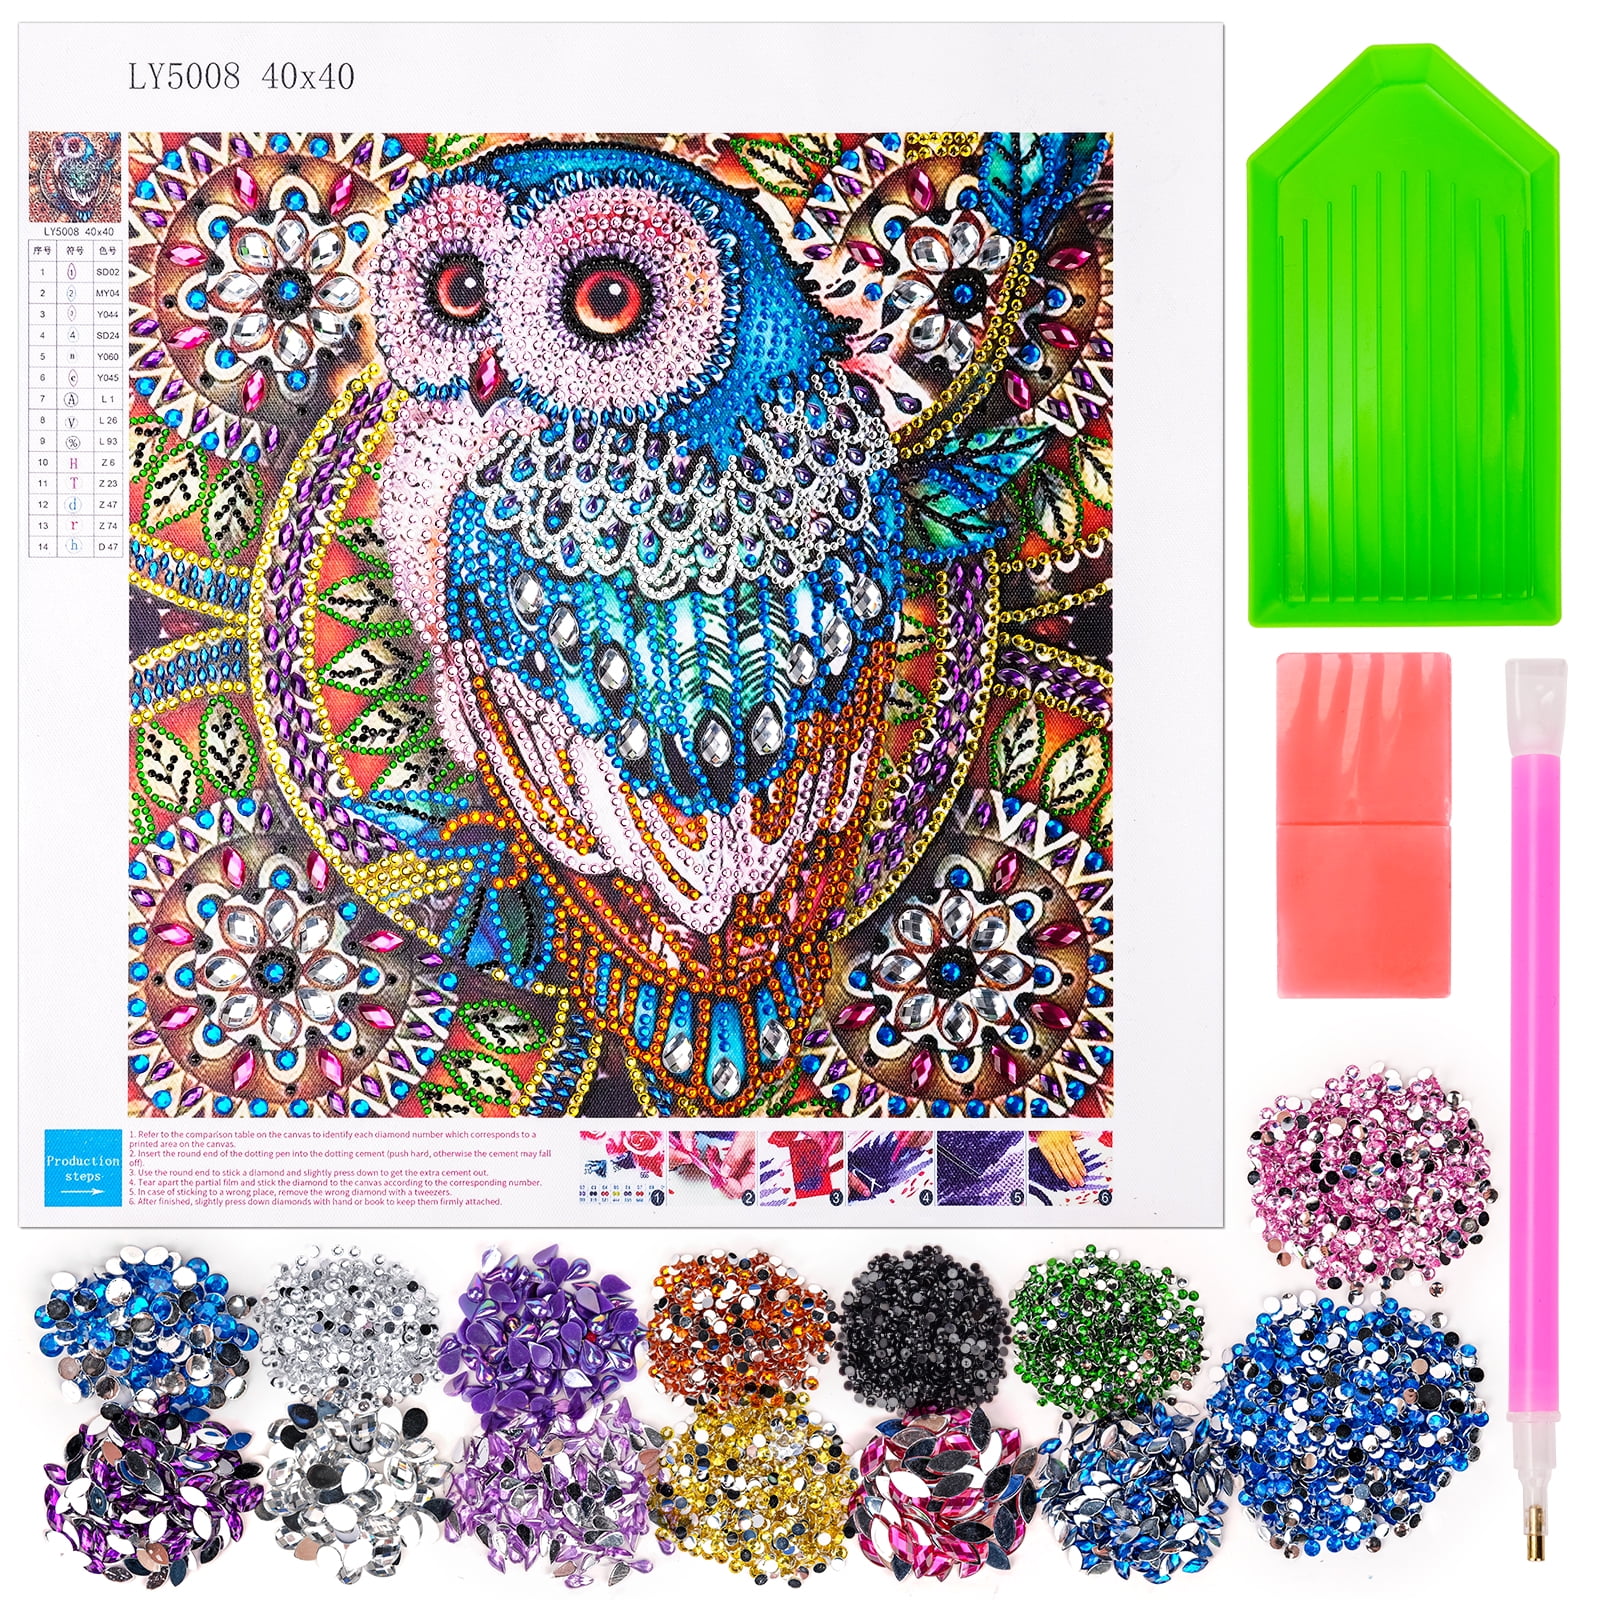  5D Diamond Painting By Number Kit For Adults, Diy Full